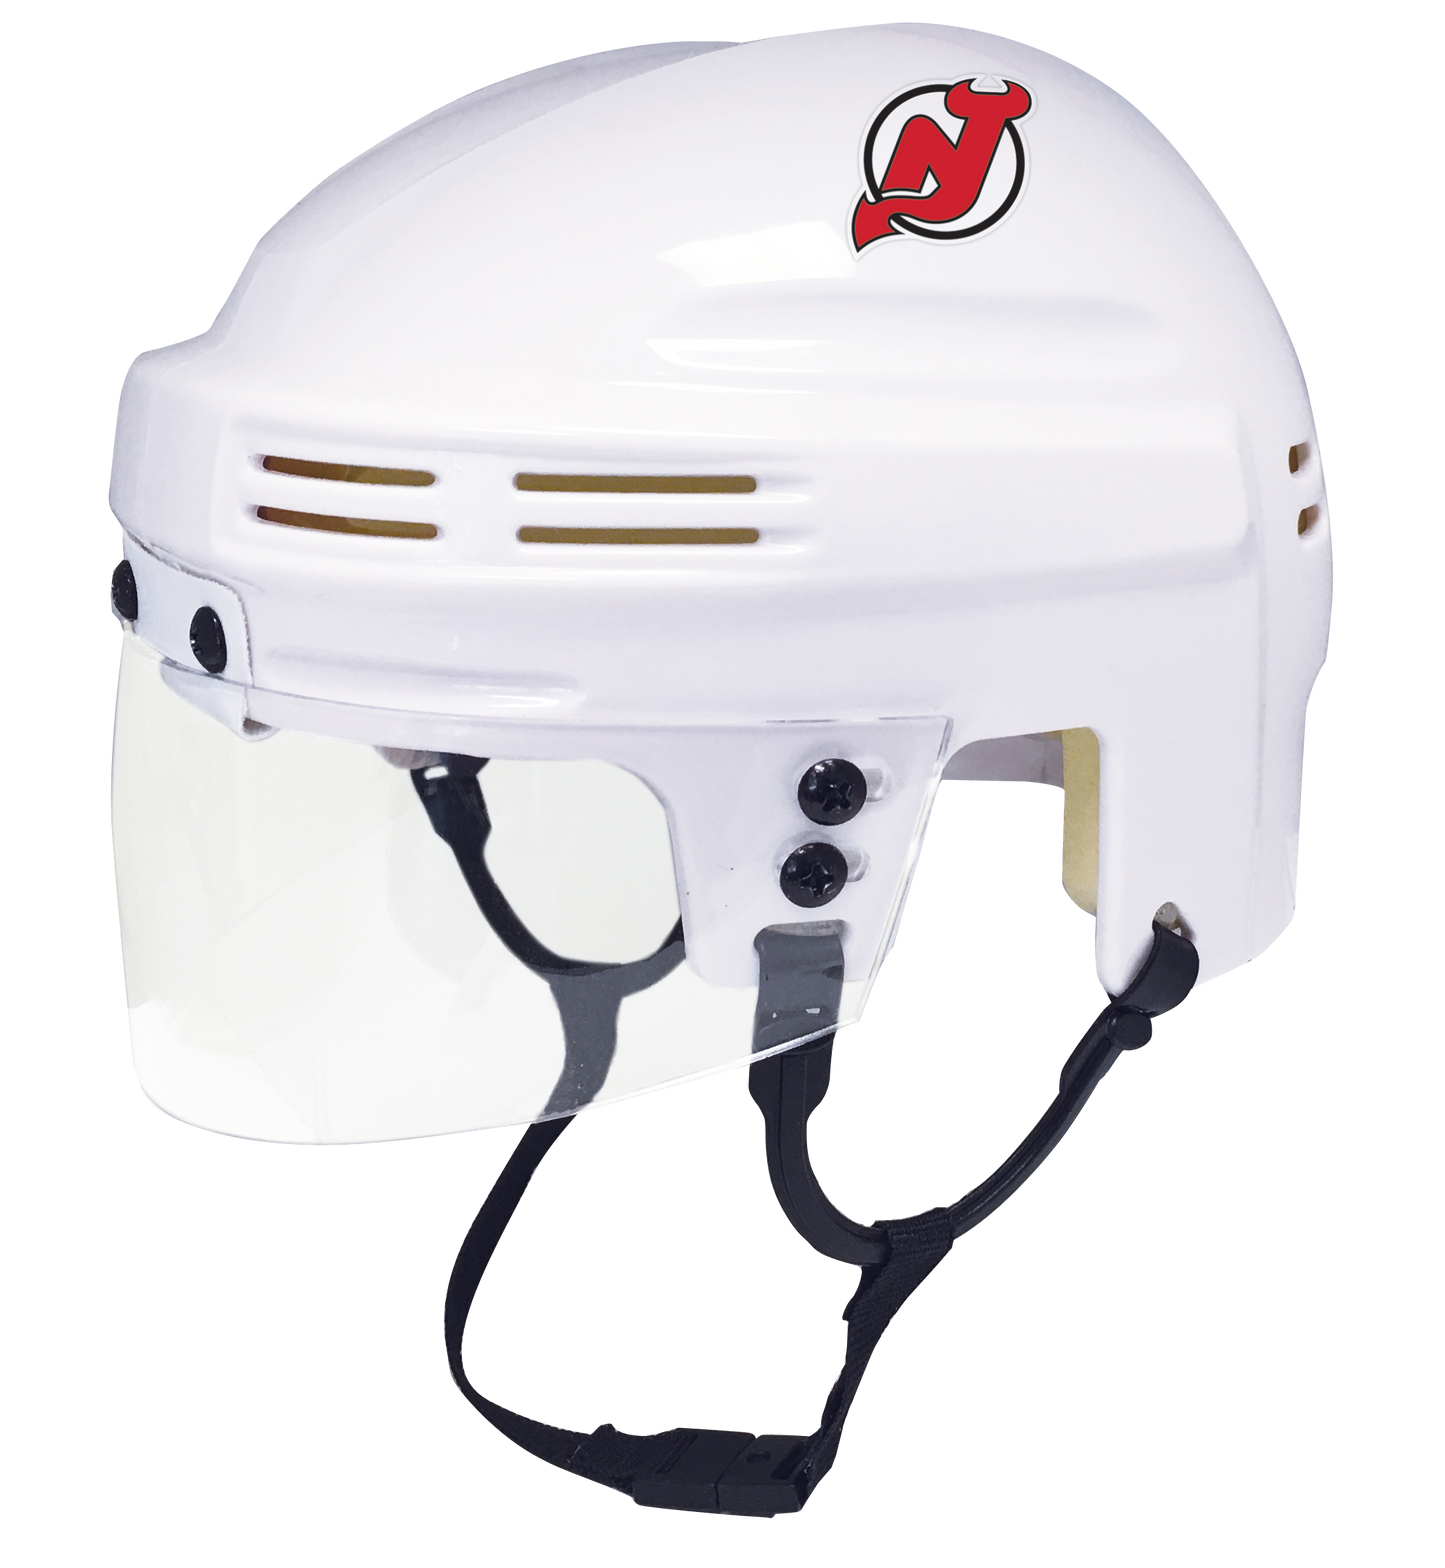 New Jersey Devils - NHL Collectible Mini Helmet - Picture Inside - FANZ Collectibles